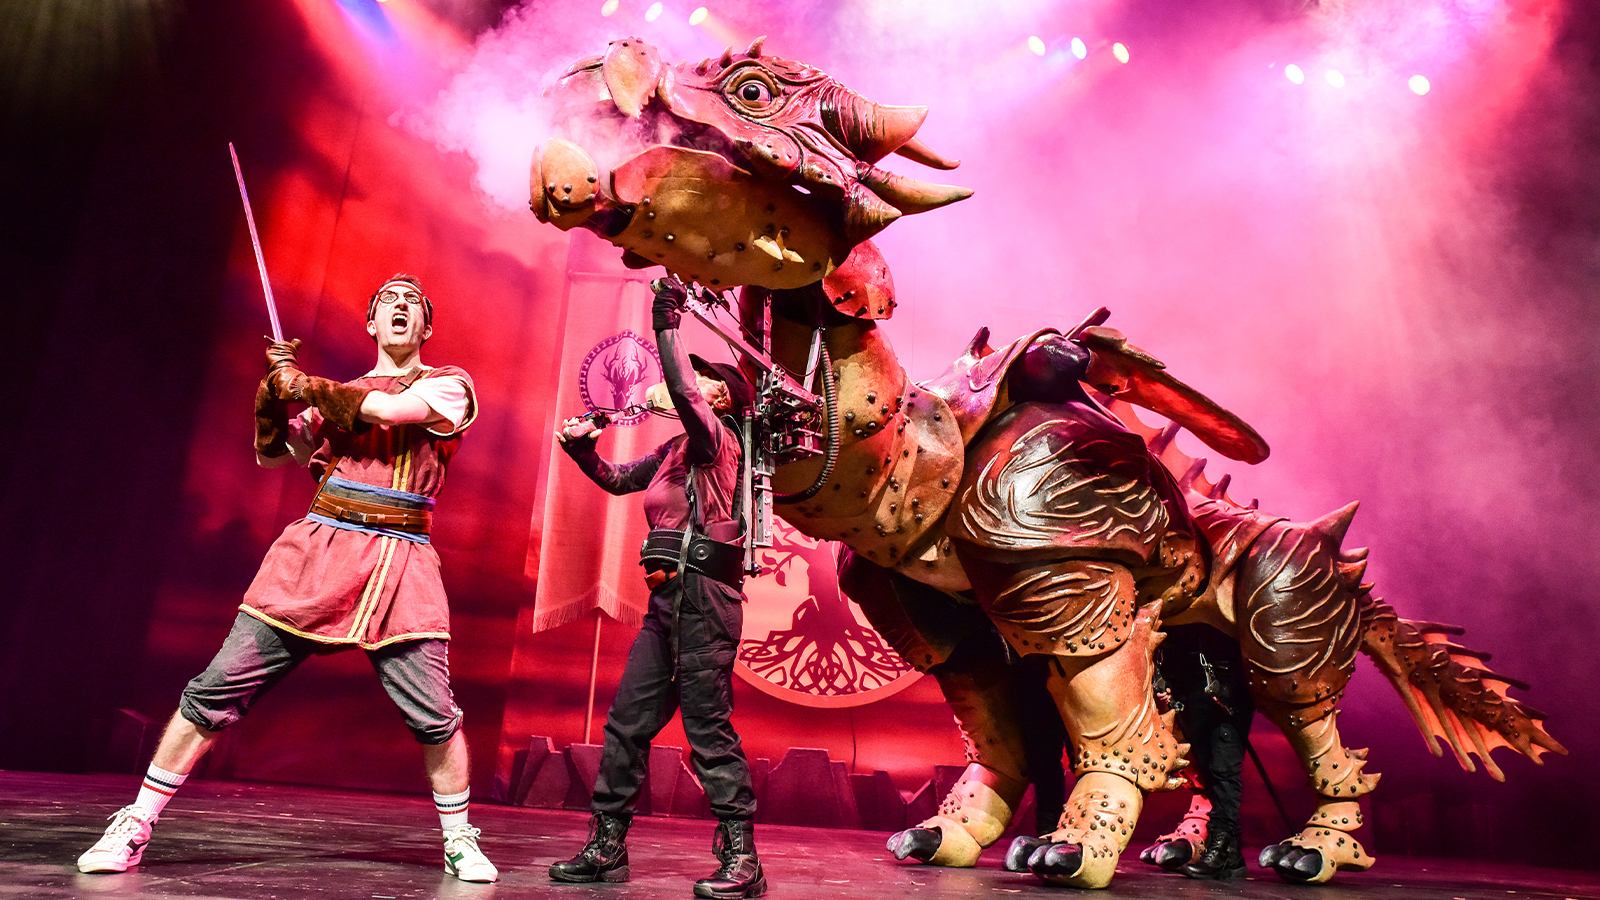 Image of a huge dragon puppet and the main character with dramatic red lighting